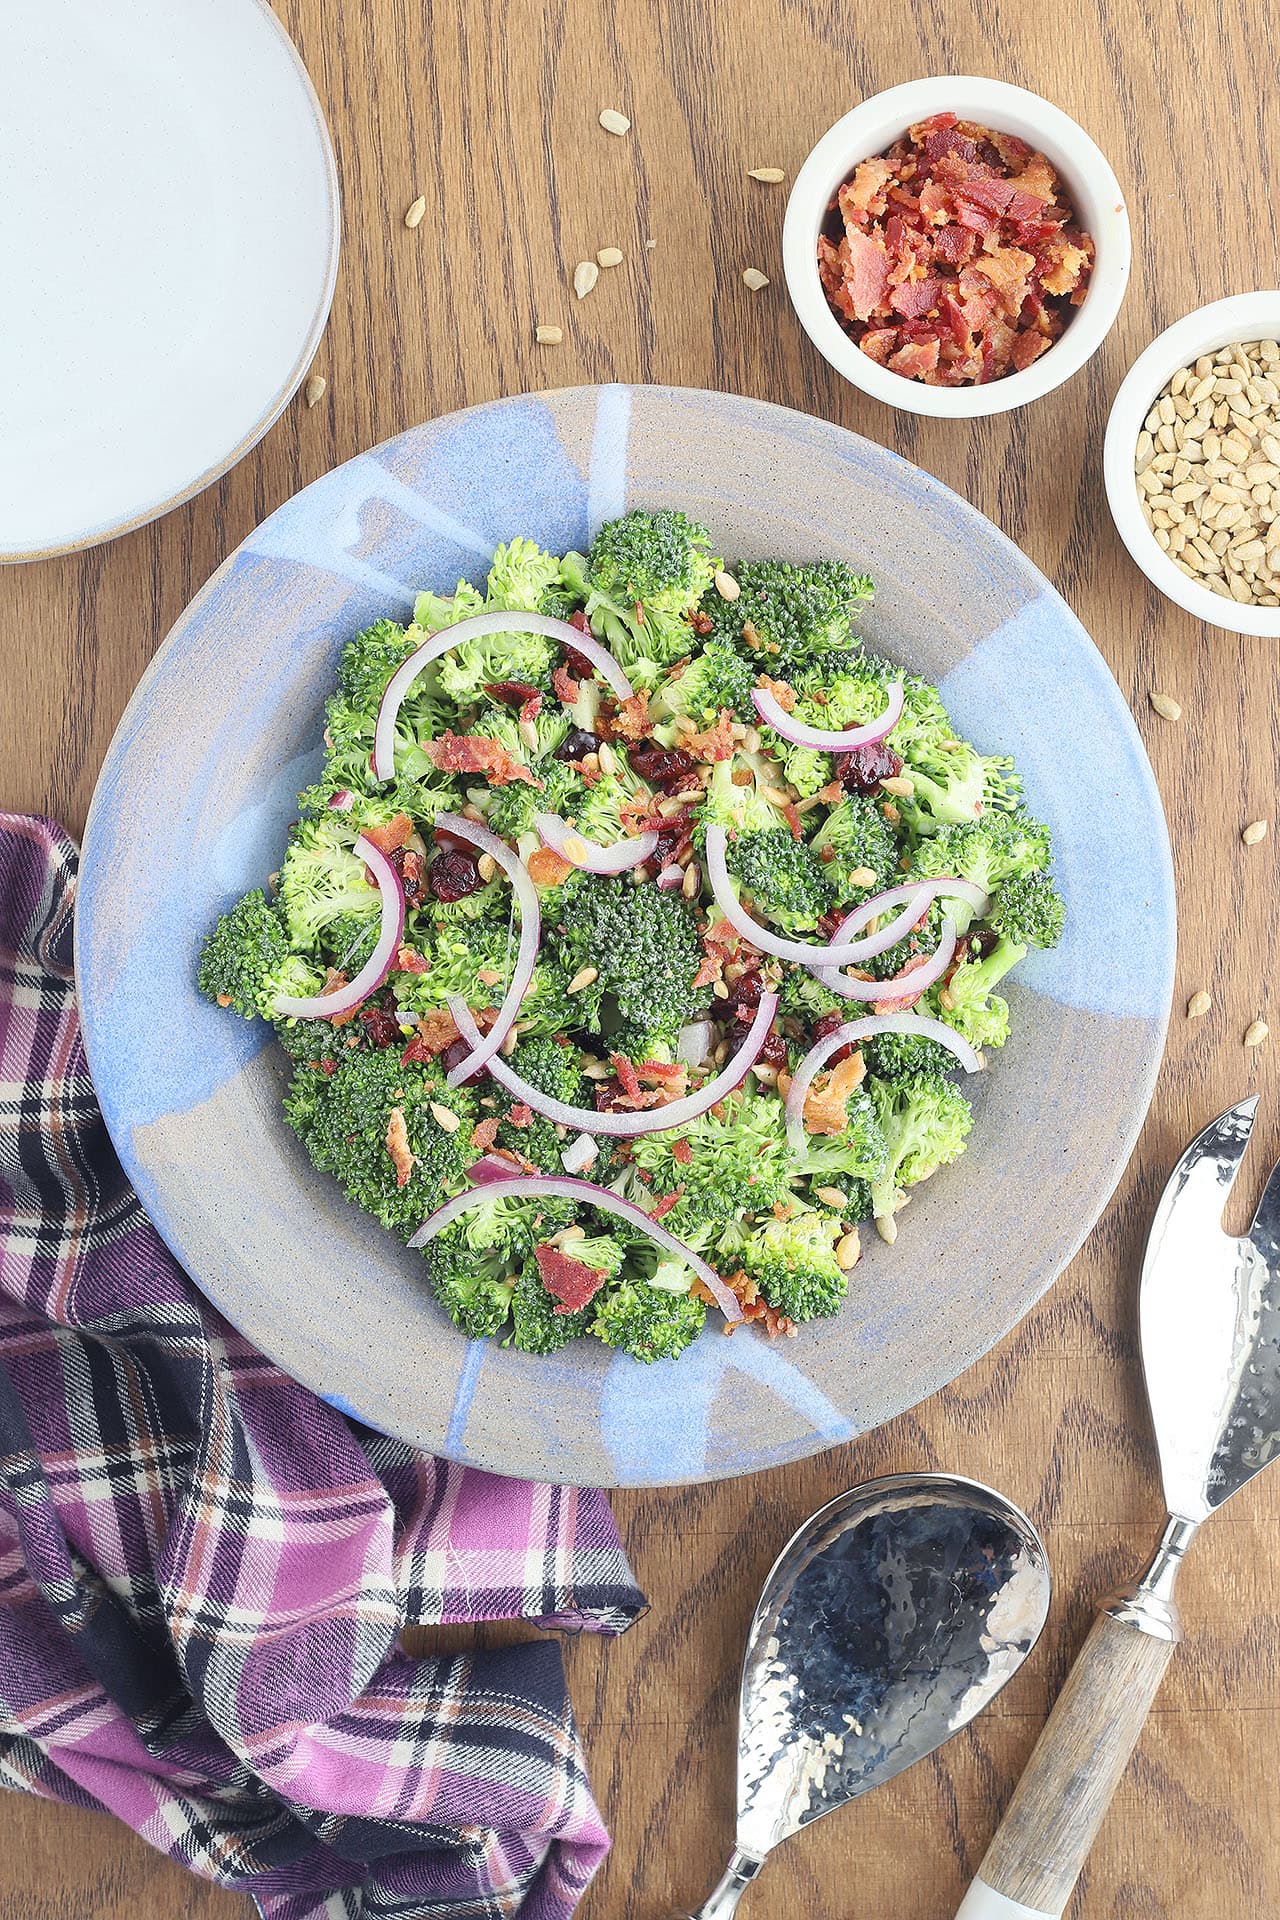 Broccoli salad with bacon and cranberries is a delicious way to eat your veggies. Fresh broccoli florets are topped with dried cranberries, bacon, sunflower seeds and red onion, then tossed in a light, creamy dressing.